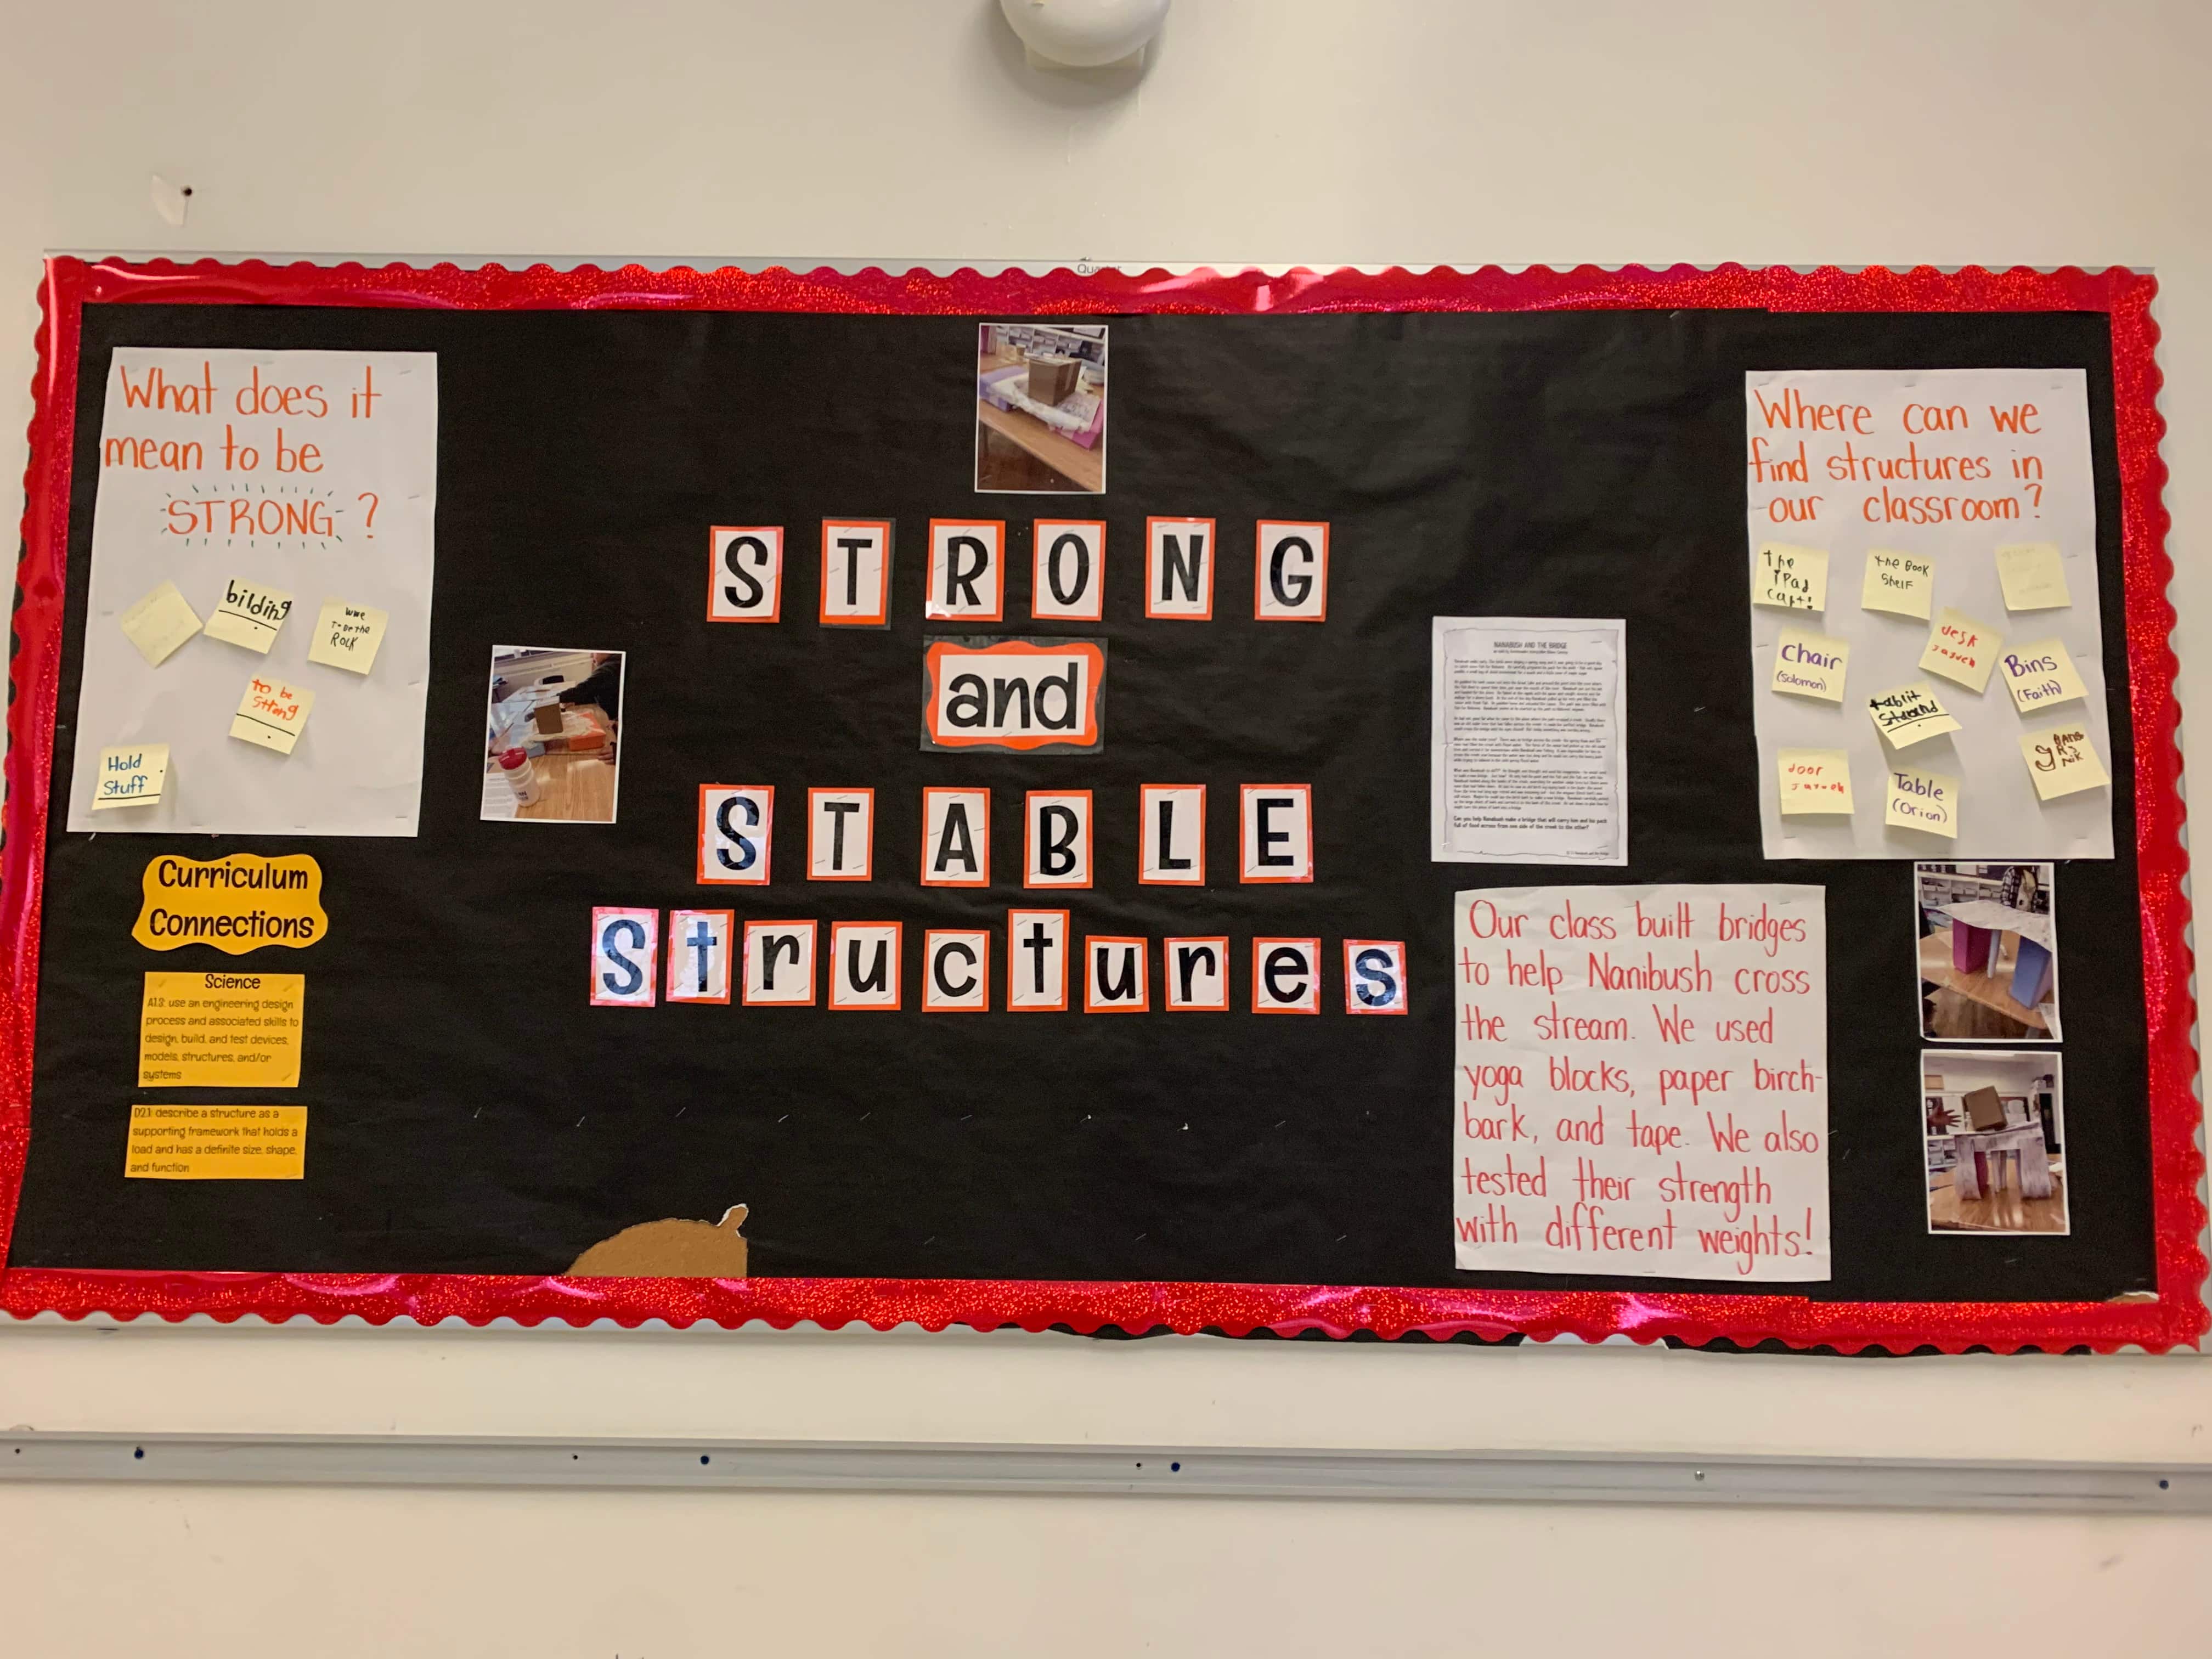 A school hallways board displaying student work on the "Strong and Stable structures" unit.